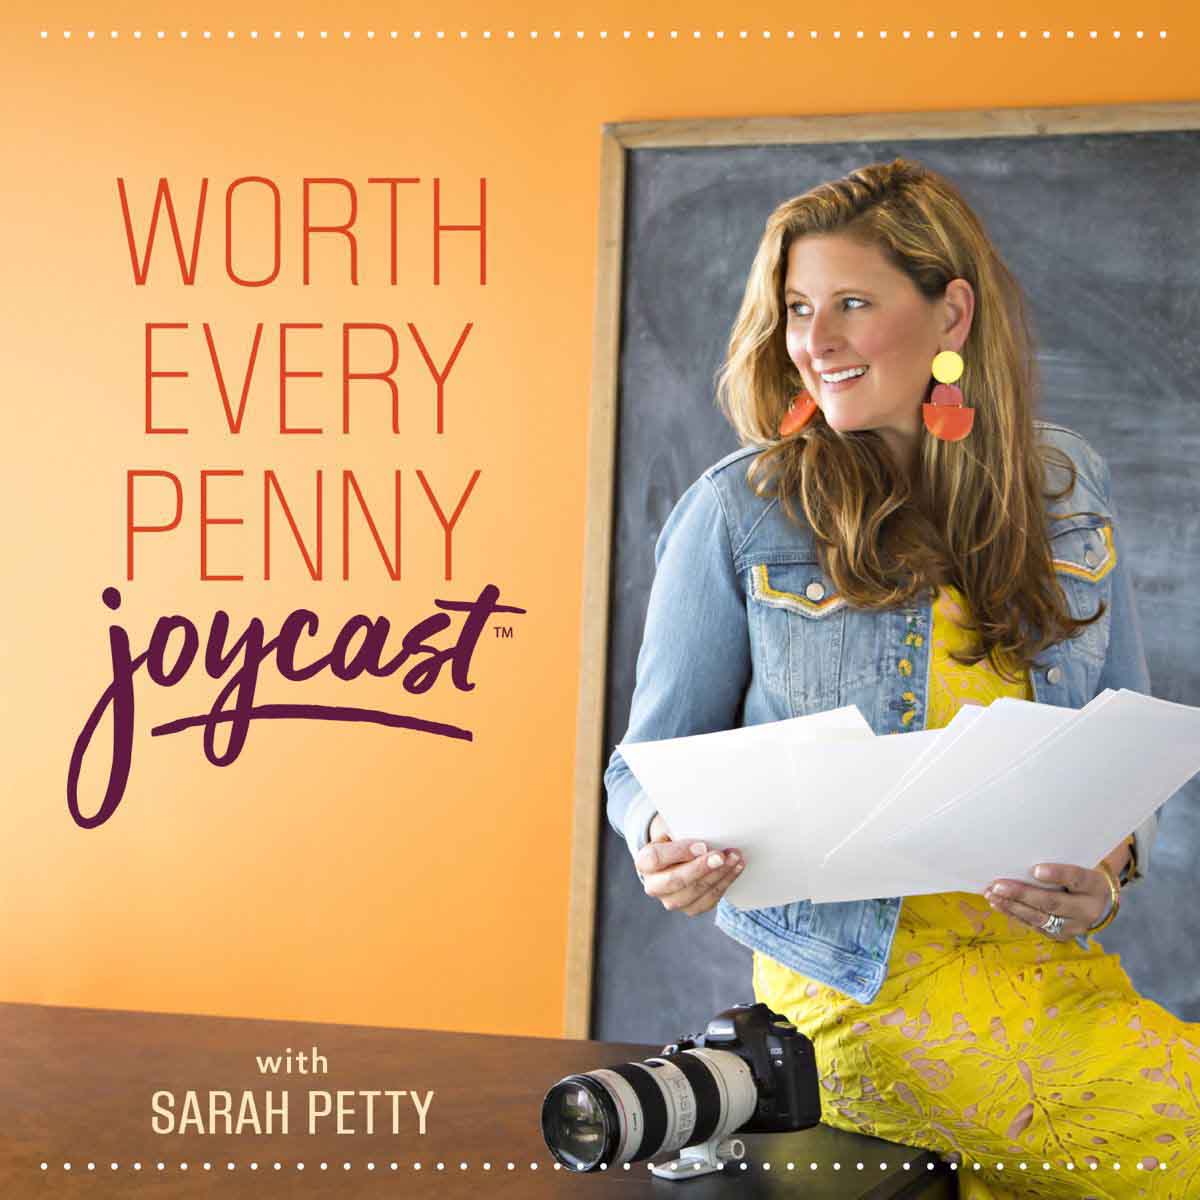 Worth Every Penny Joycast – Podcast – Sarah Petty Podcast for photographers